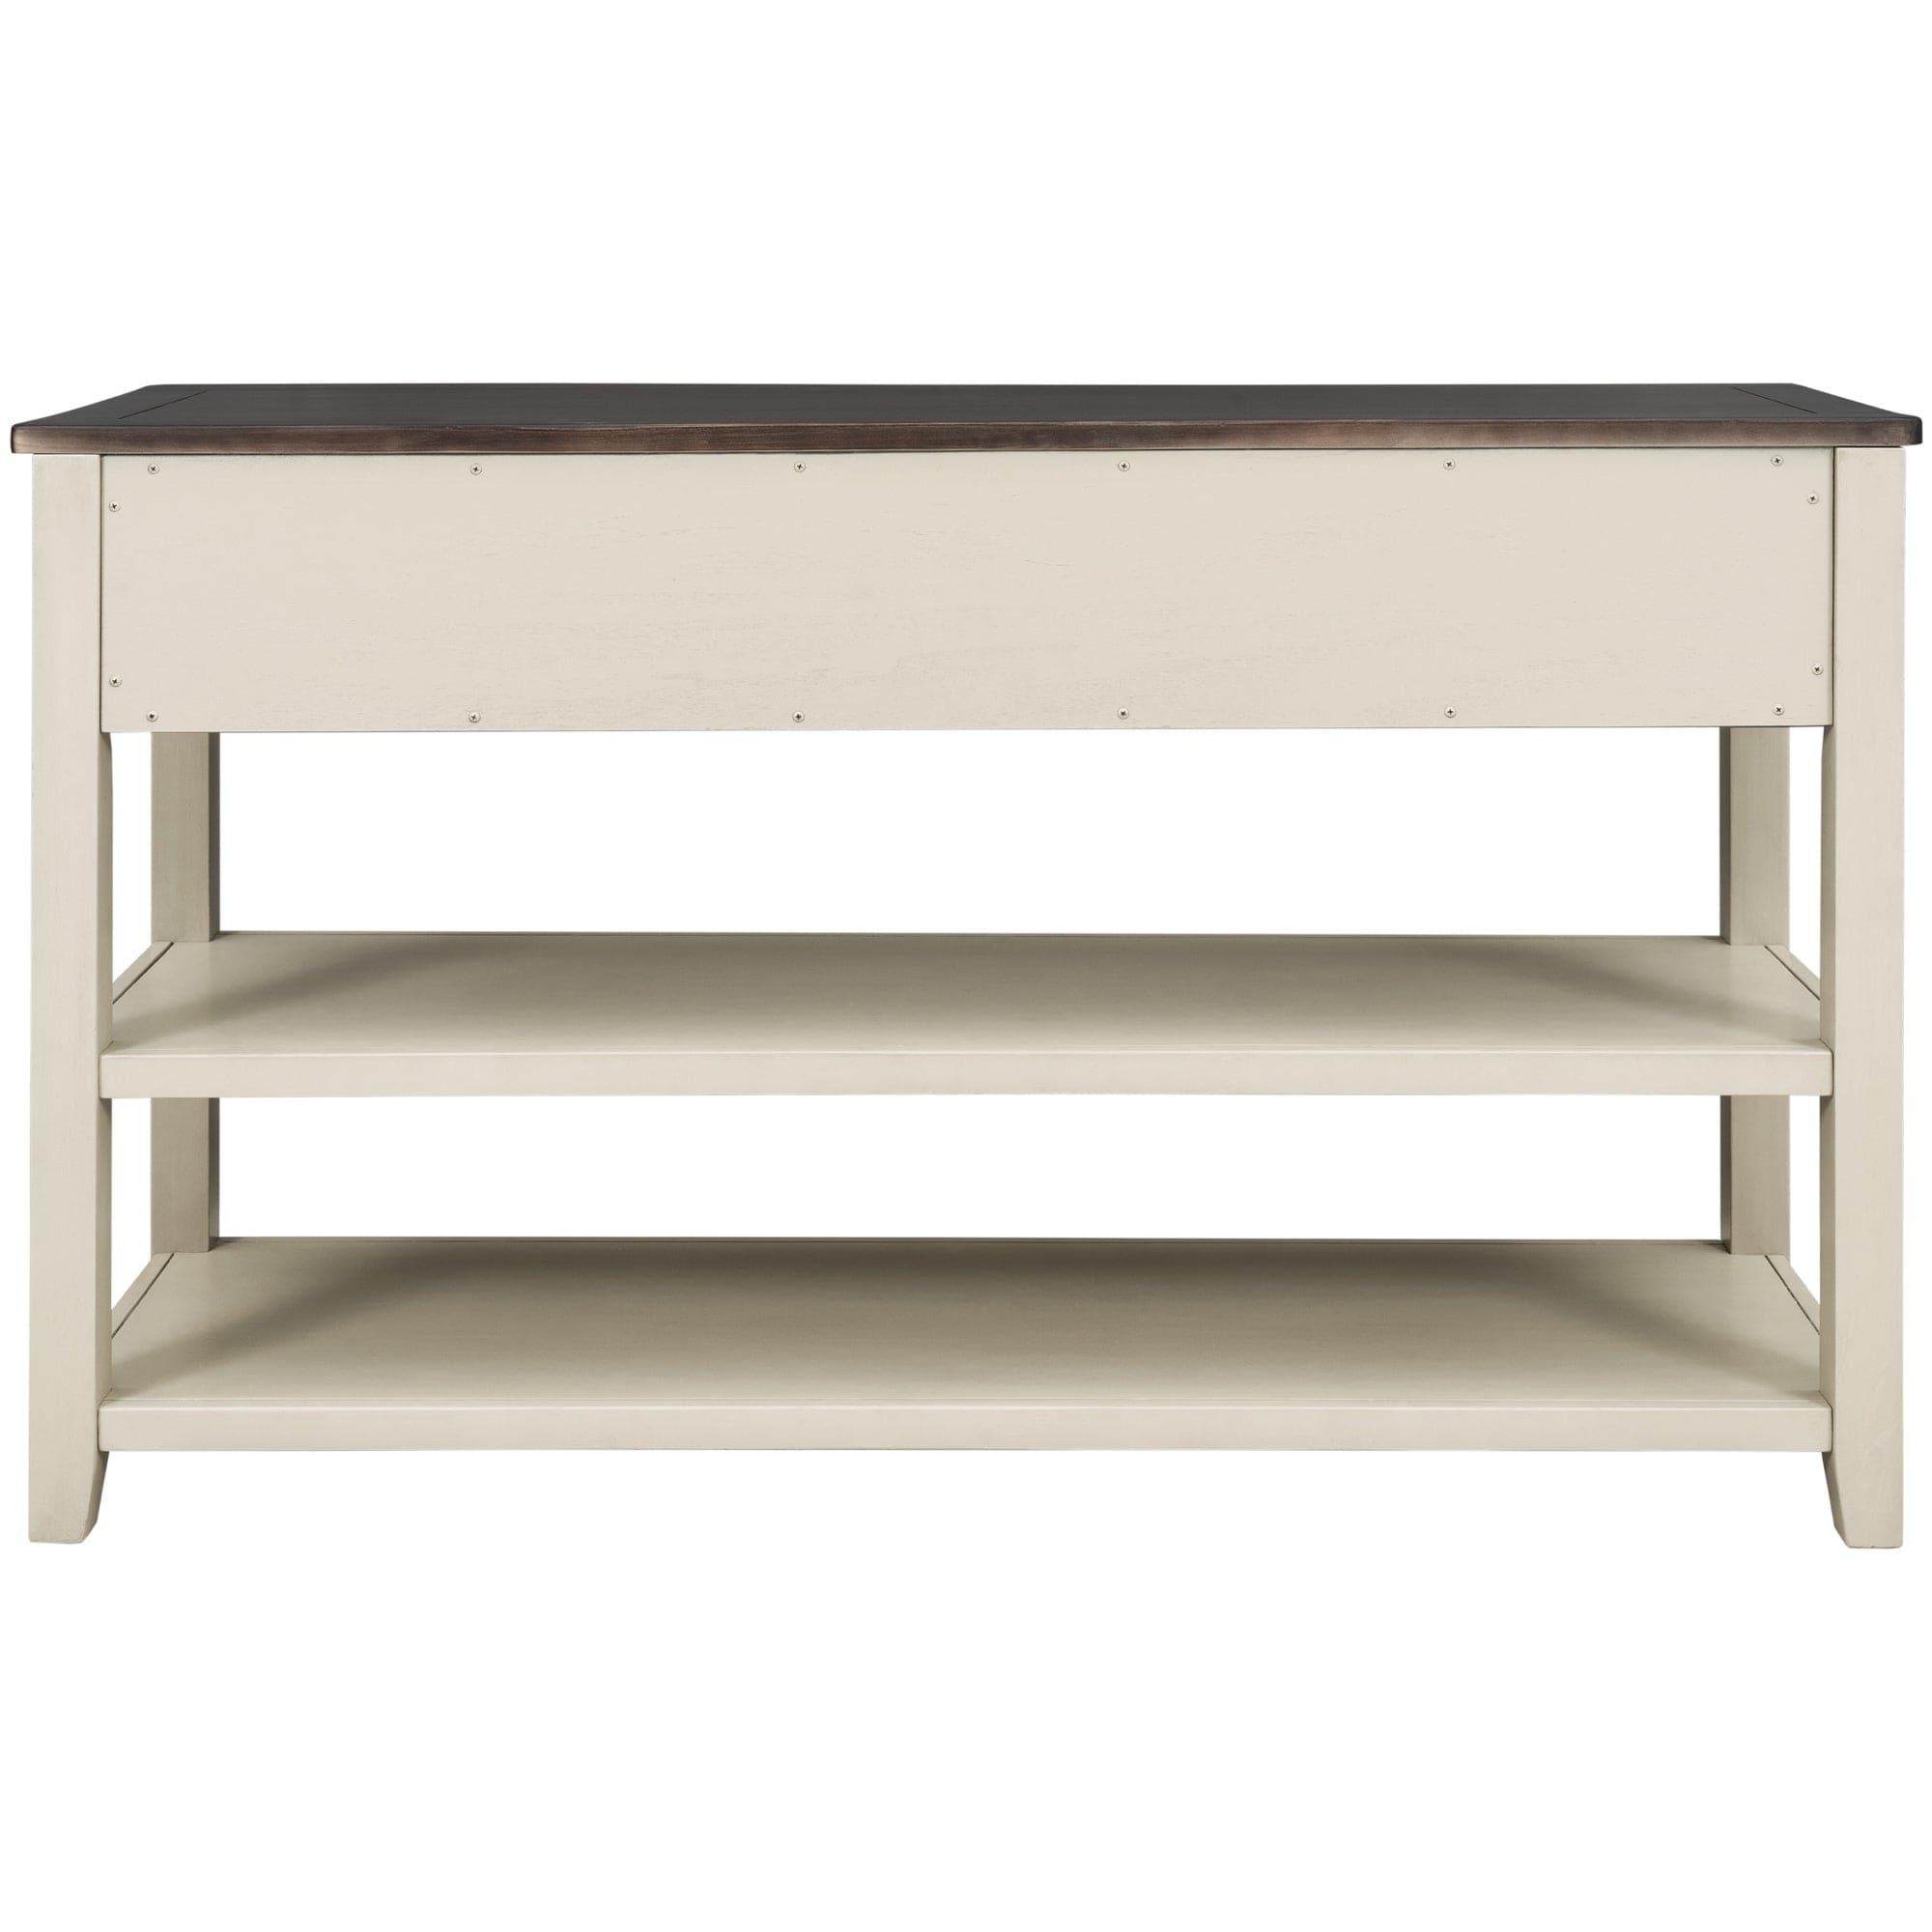 Shop TREXM Retro Design Console Table with Two Open Shelves, Pine Solid Wood Frame and Legs for Living Room (Espresso+Beige) Mademoiselle Home Decor